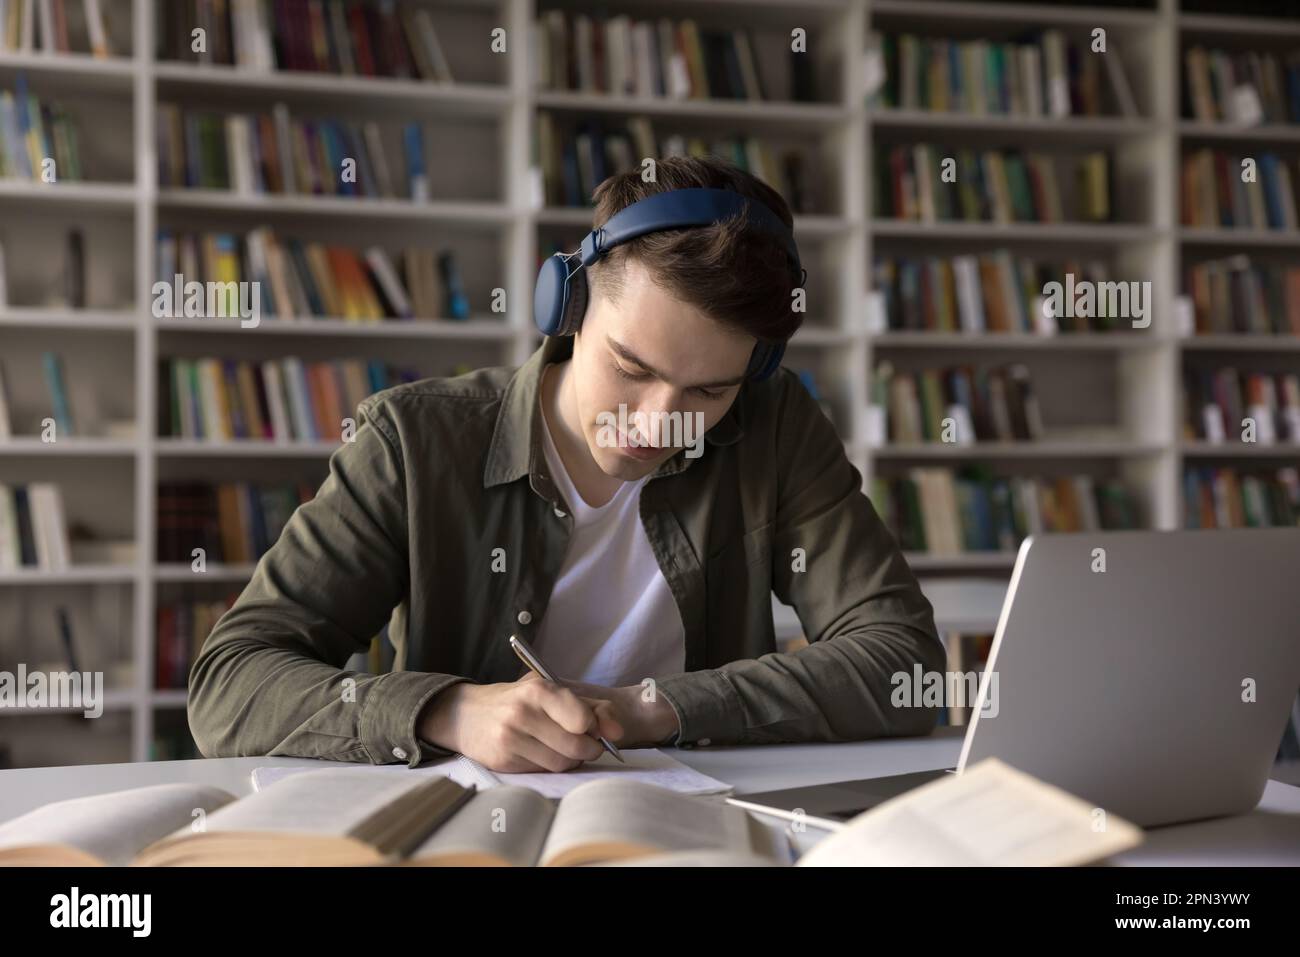 Schoolboy listening task through headphones prepare assignment sit in library Stock Photo